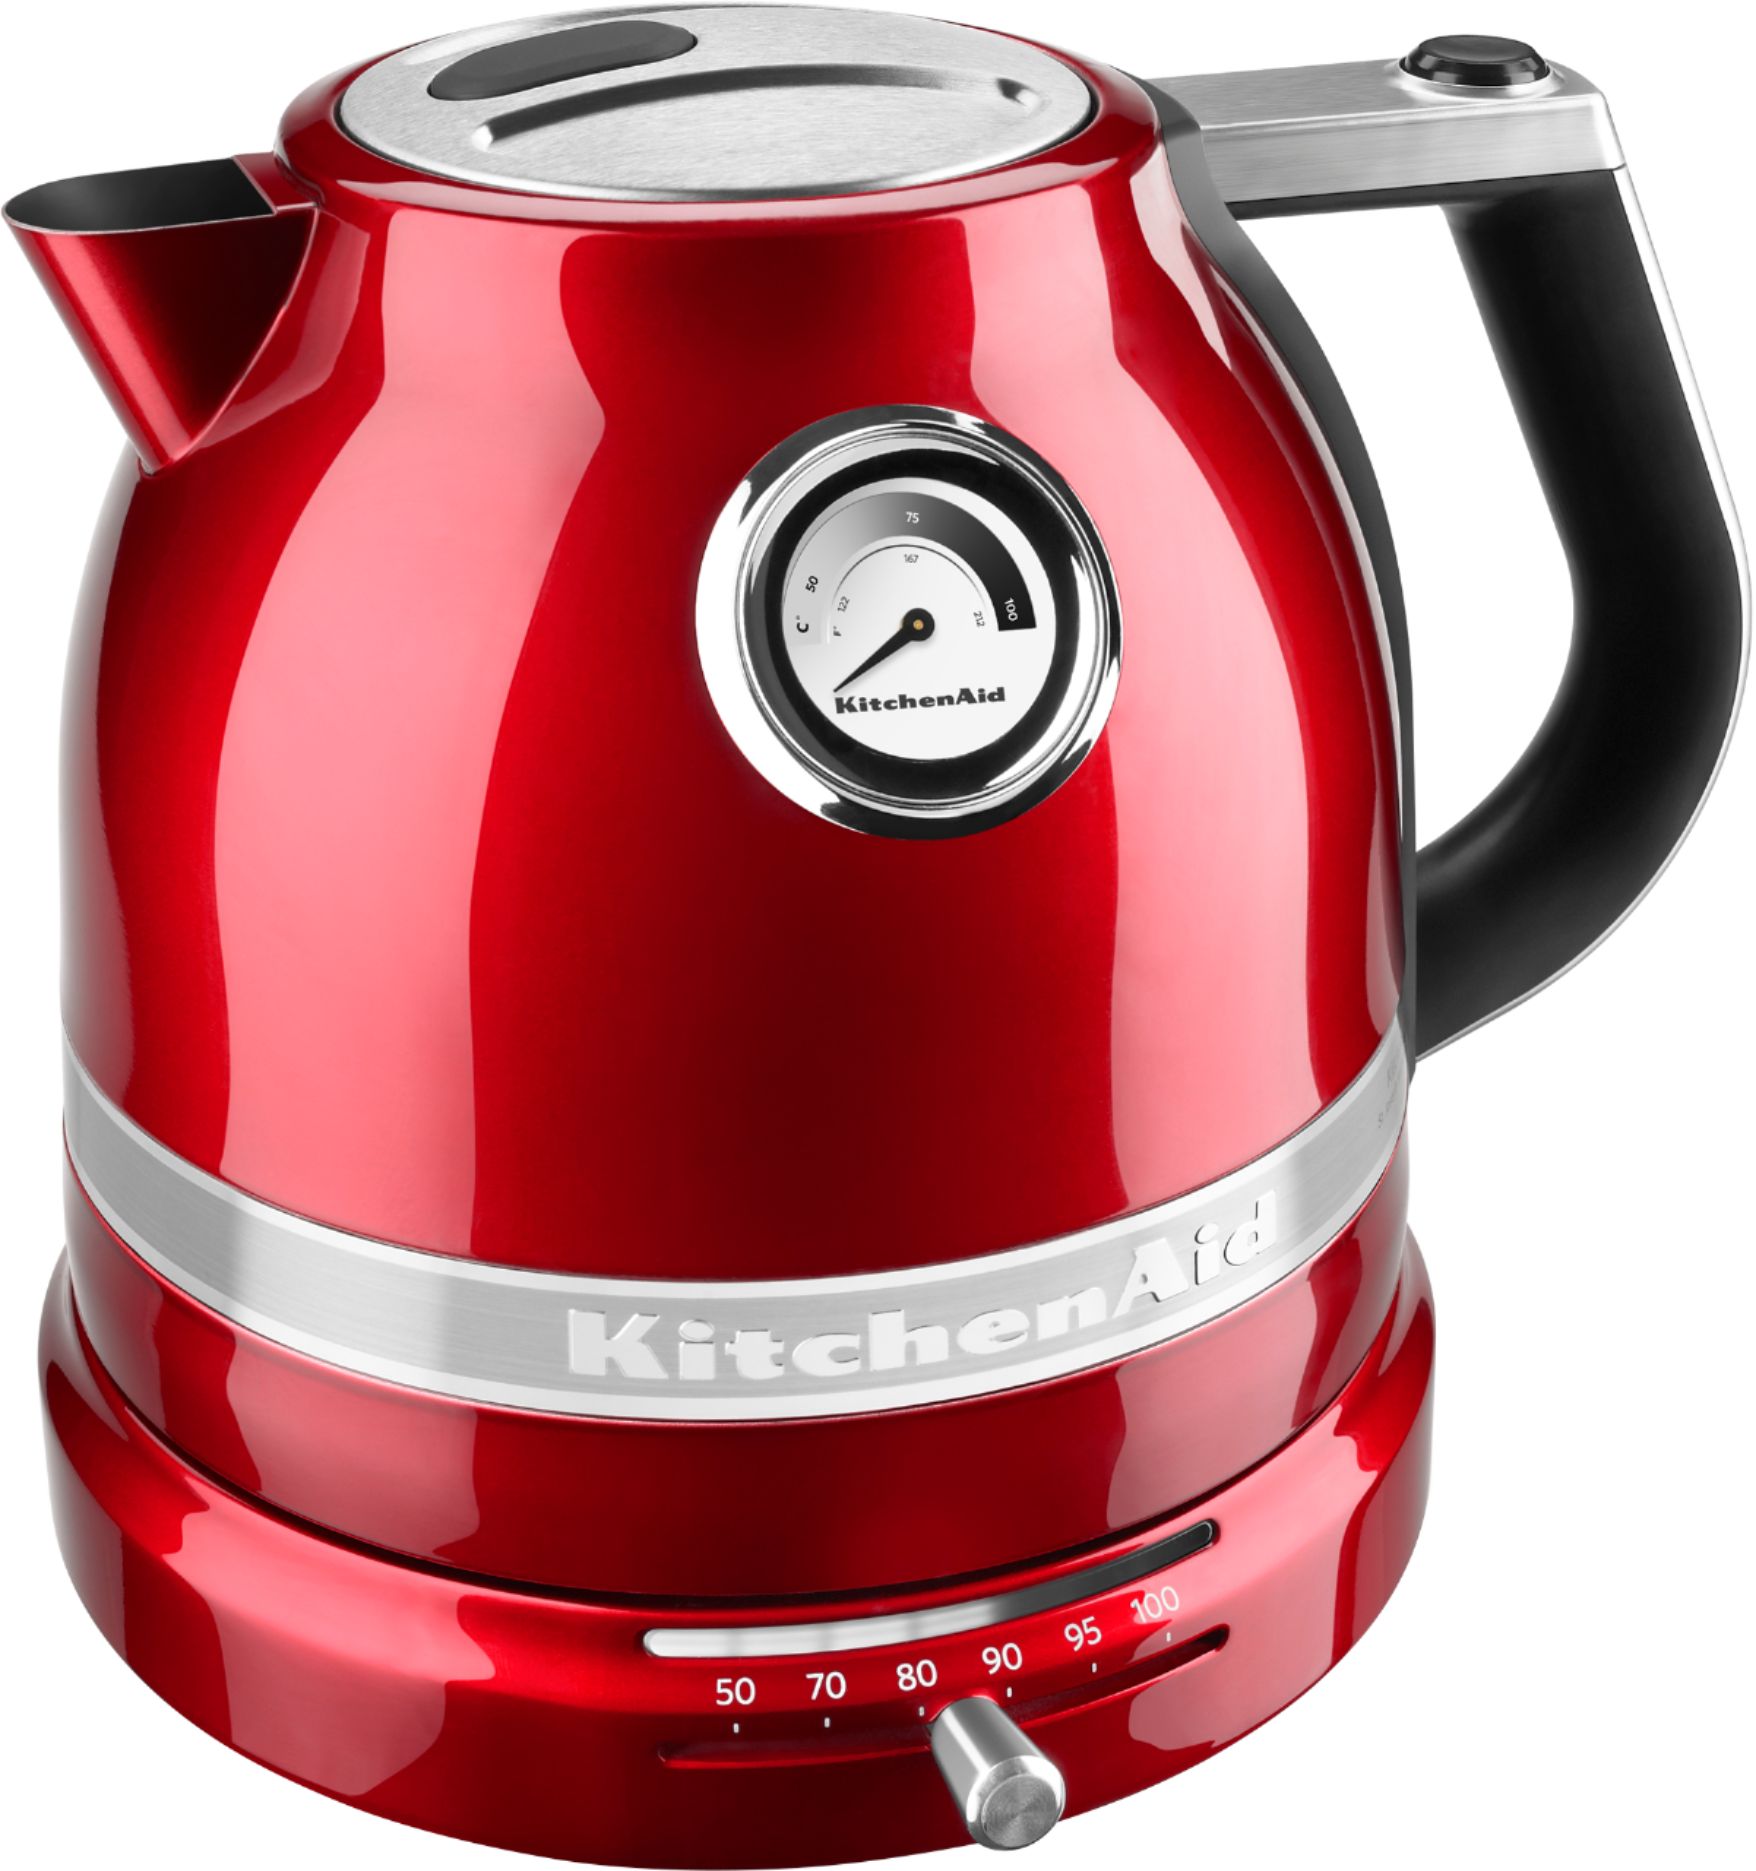 red electric kettle